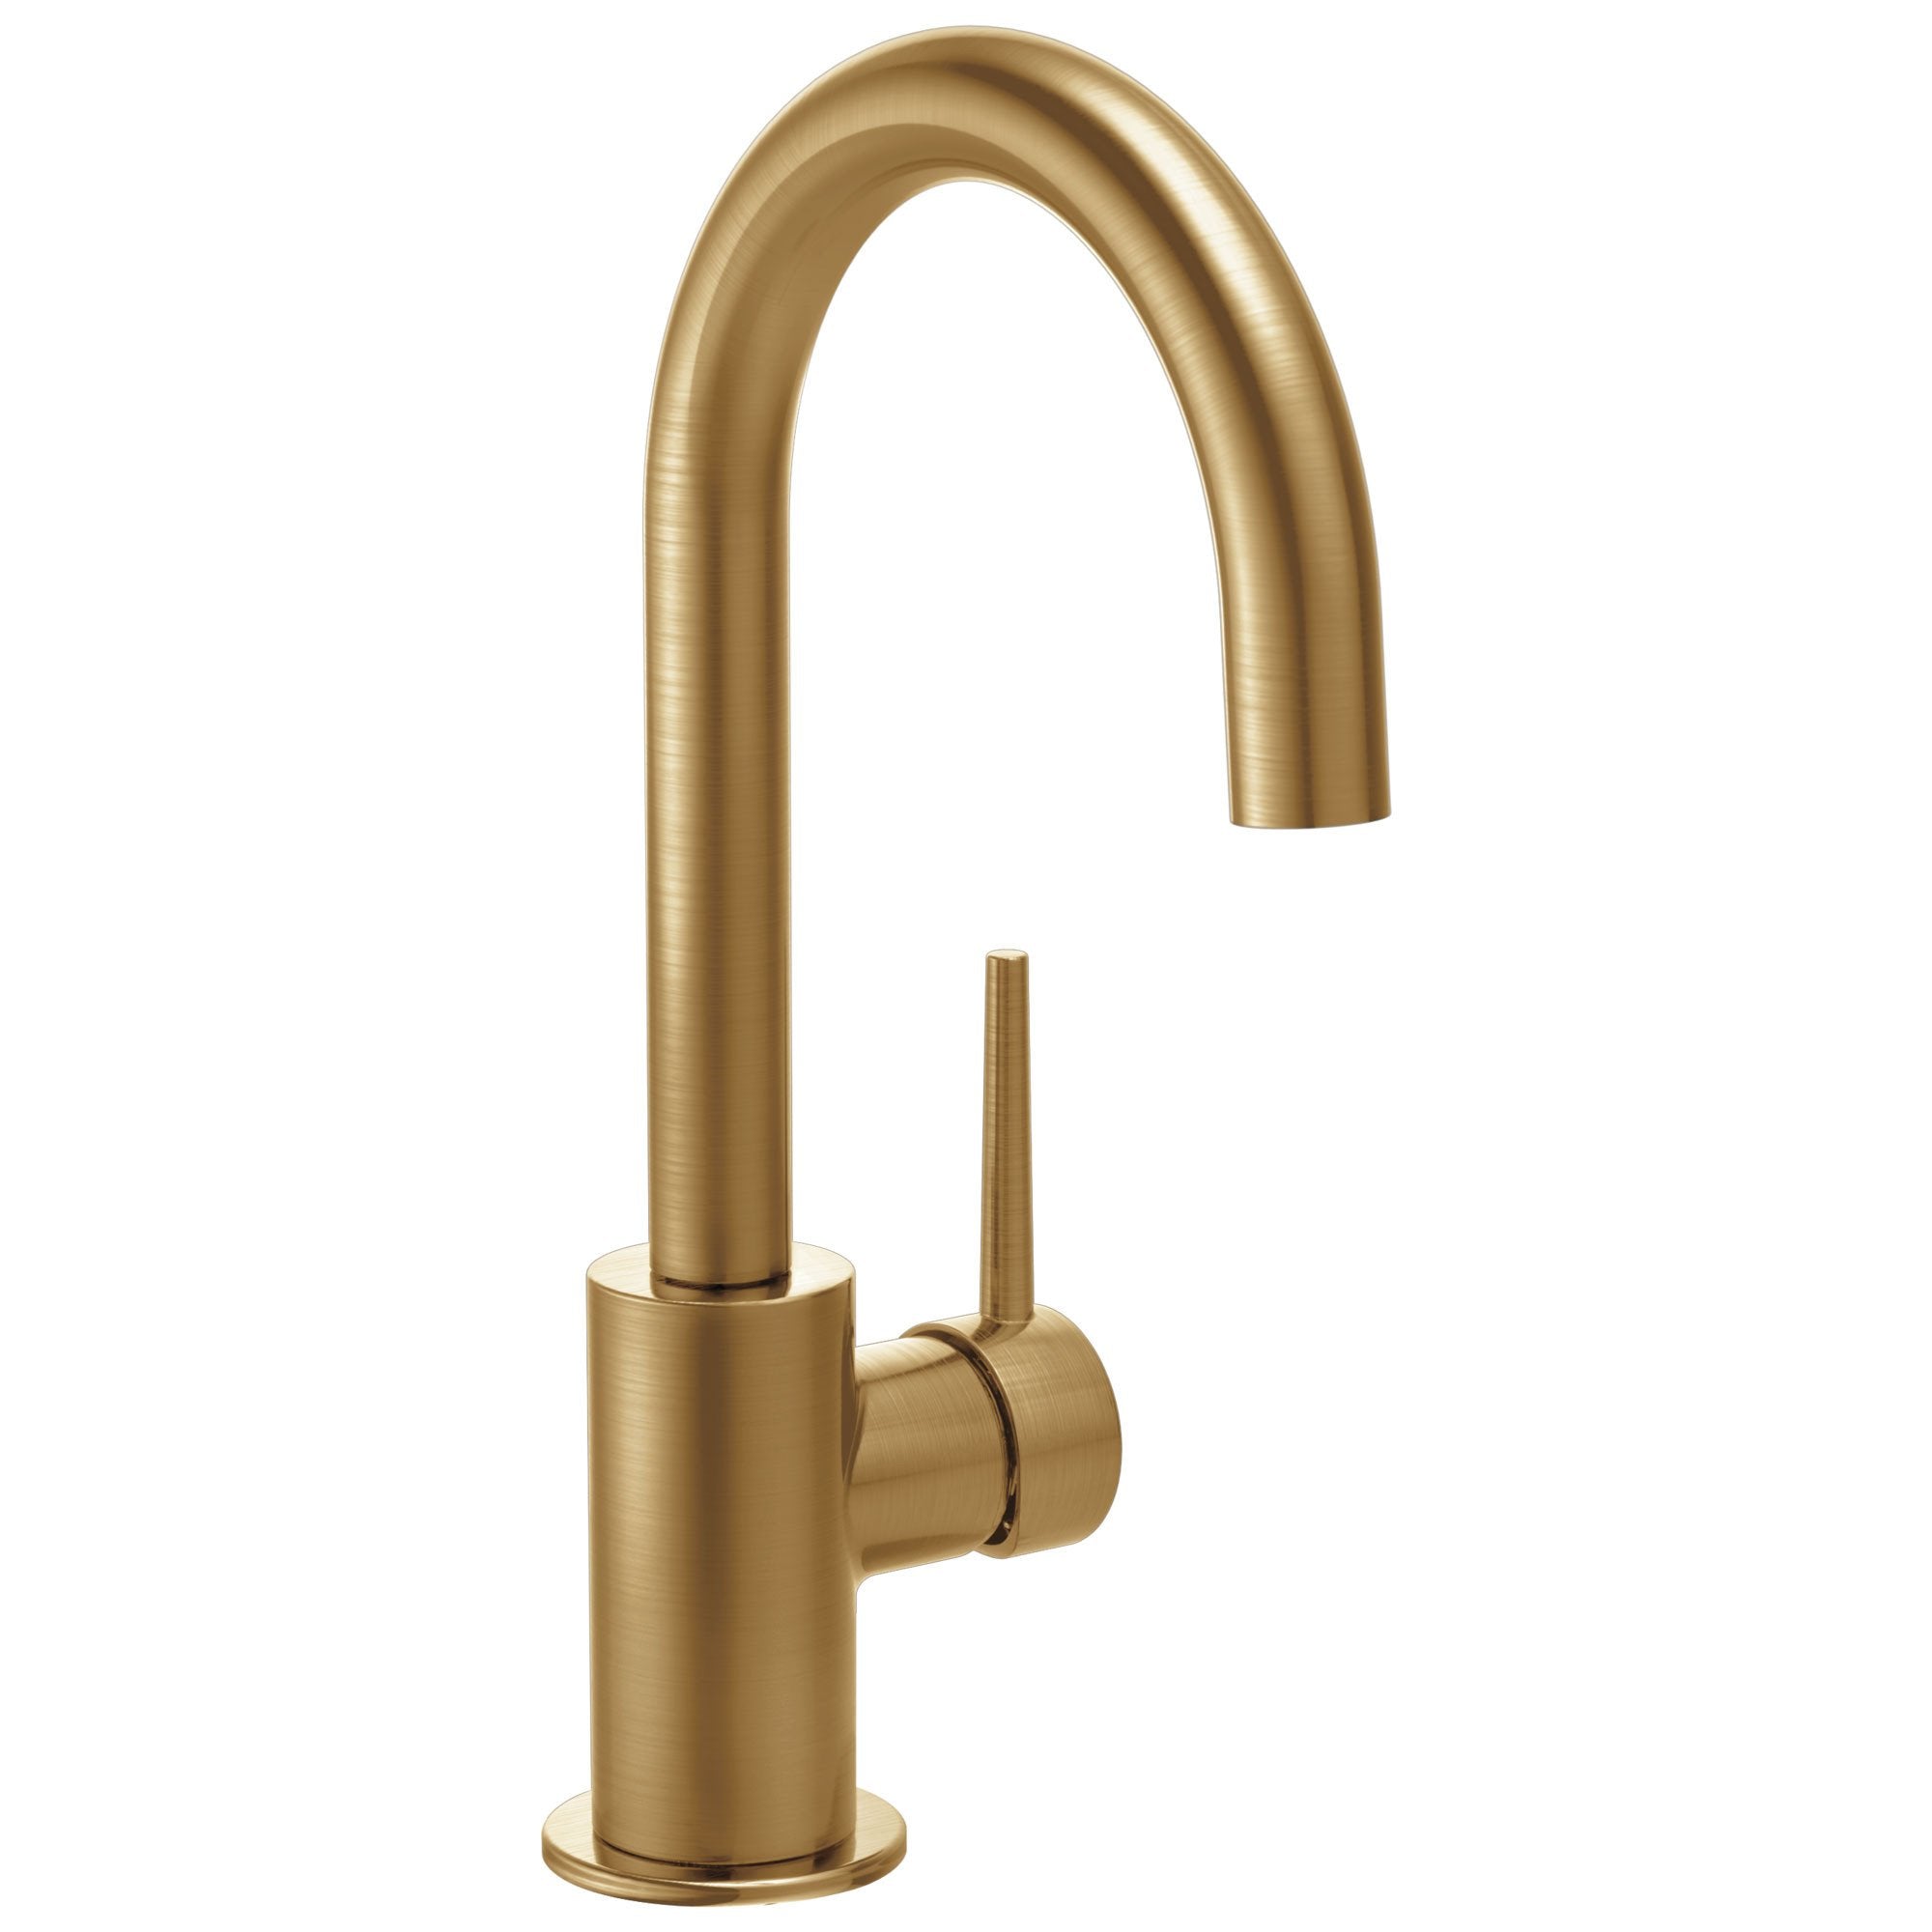 Delta Trinsic Collection Champagne Bronze Finish Single Lever Handle 360-degree Swivel Spout Modern Bar Sink Faucet 729156